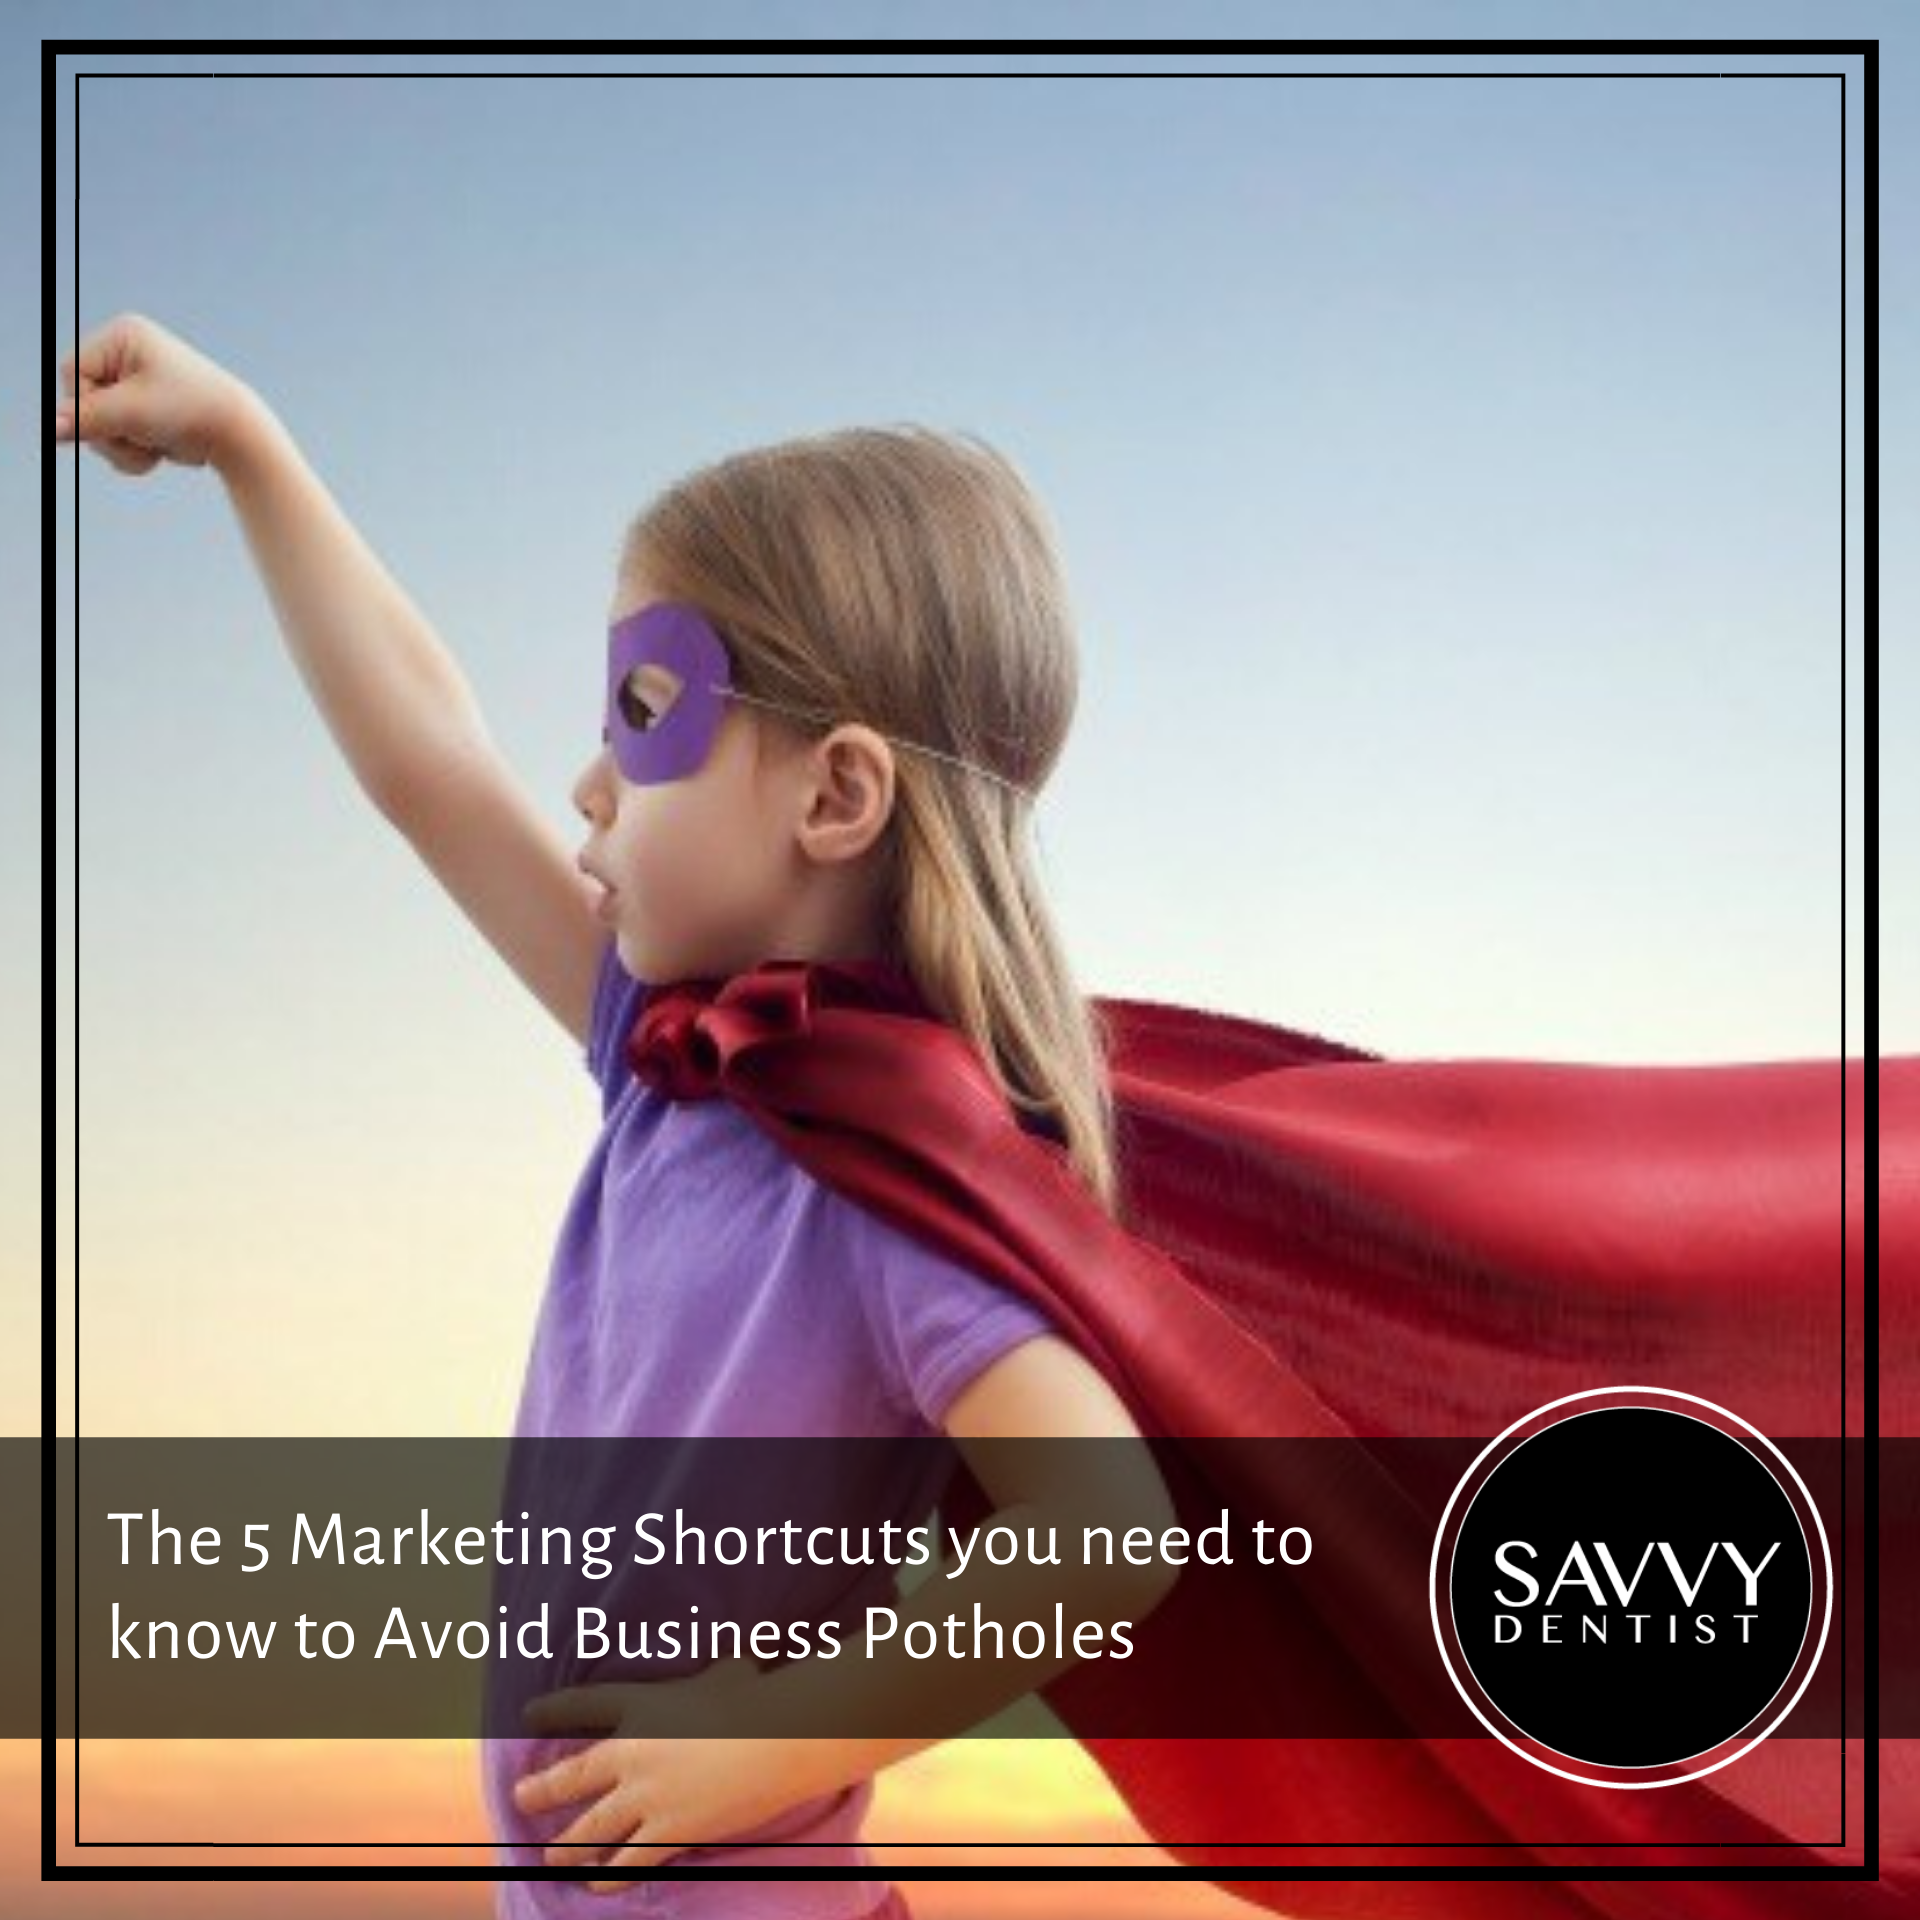 The 5 Marketing Shortcuts You Need to Know to Avoid Business Potholes